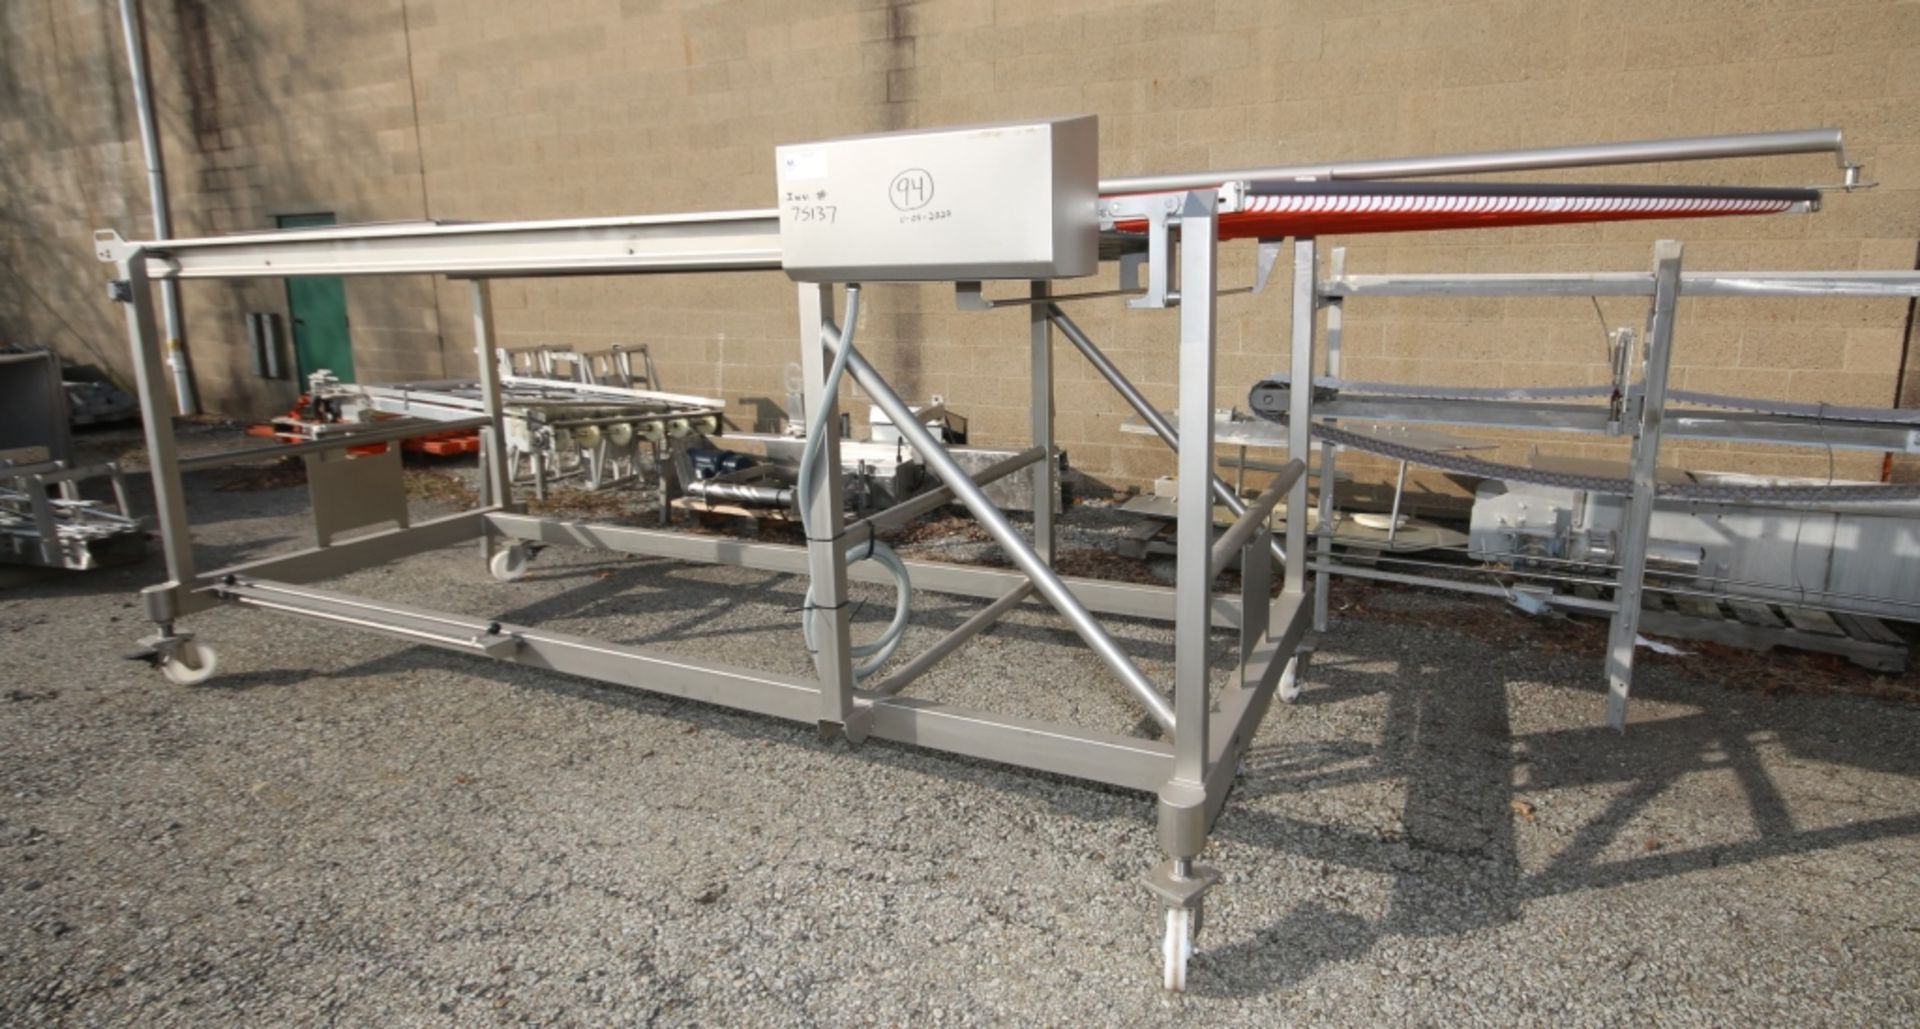 S/S Portable Power BeltConveyor with 43" W Belt & Drive with 5 ft L Eagle Belt Connection, Overall - Image 5 of 5